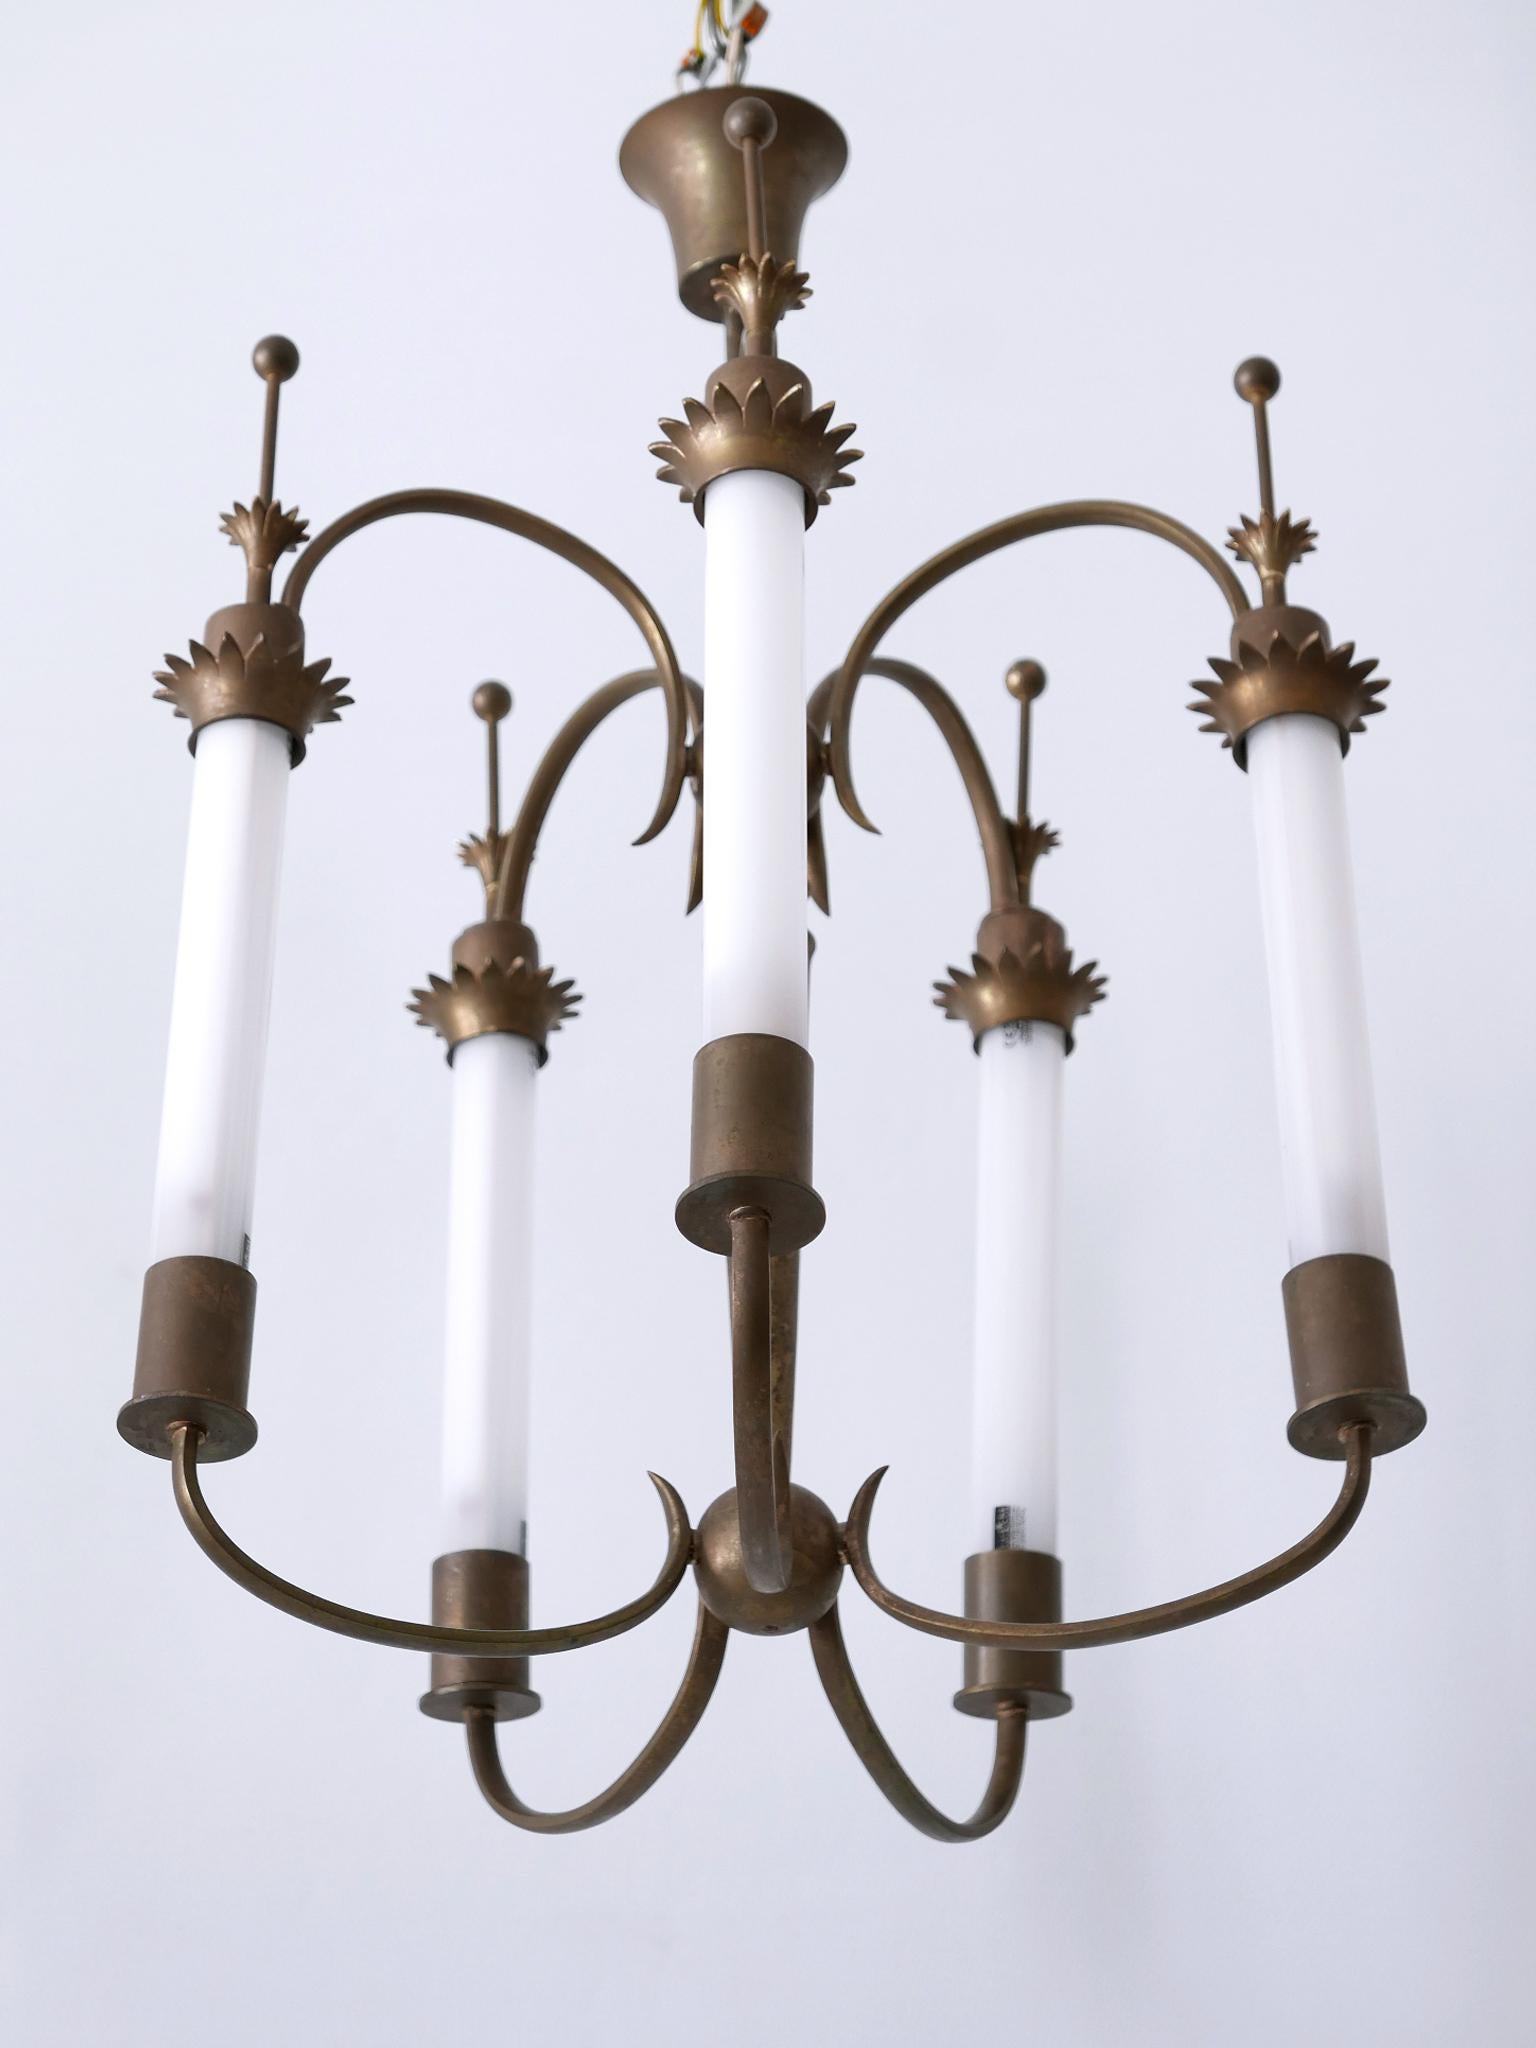 Exceptional Five-Flamed Art Deco Chandelier or Ceiling Lamp Germany 1930s For Sale 6